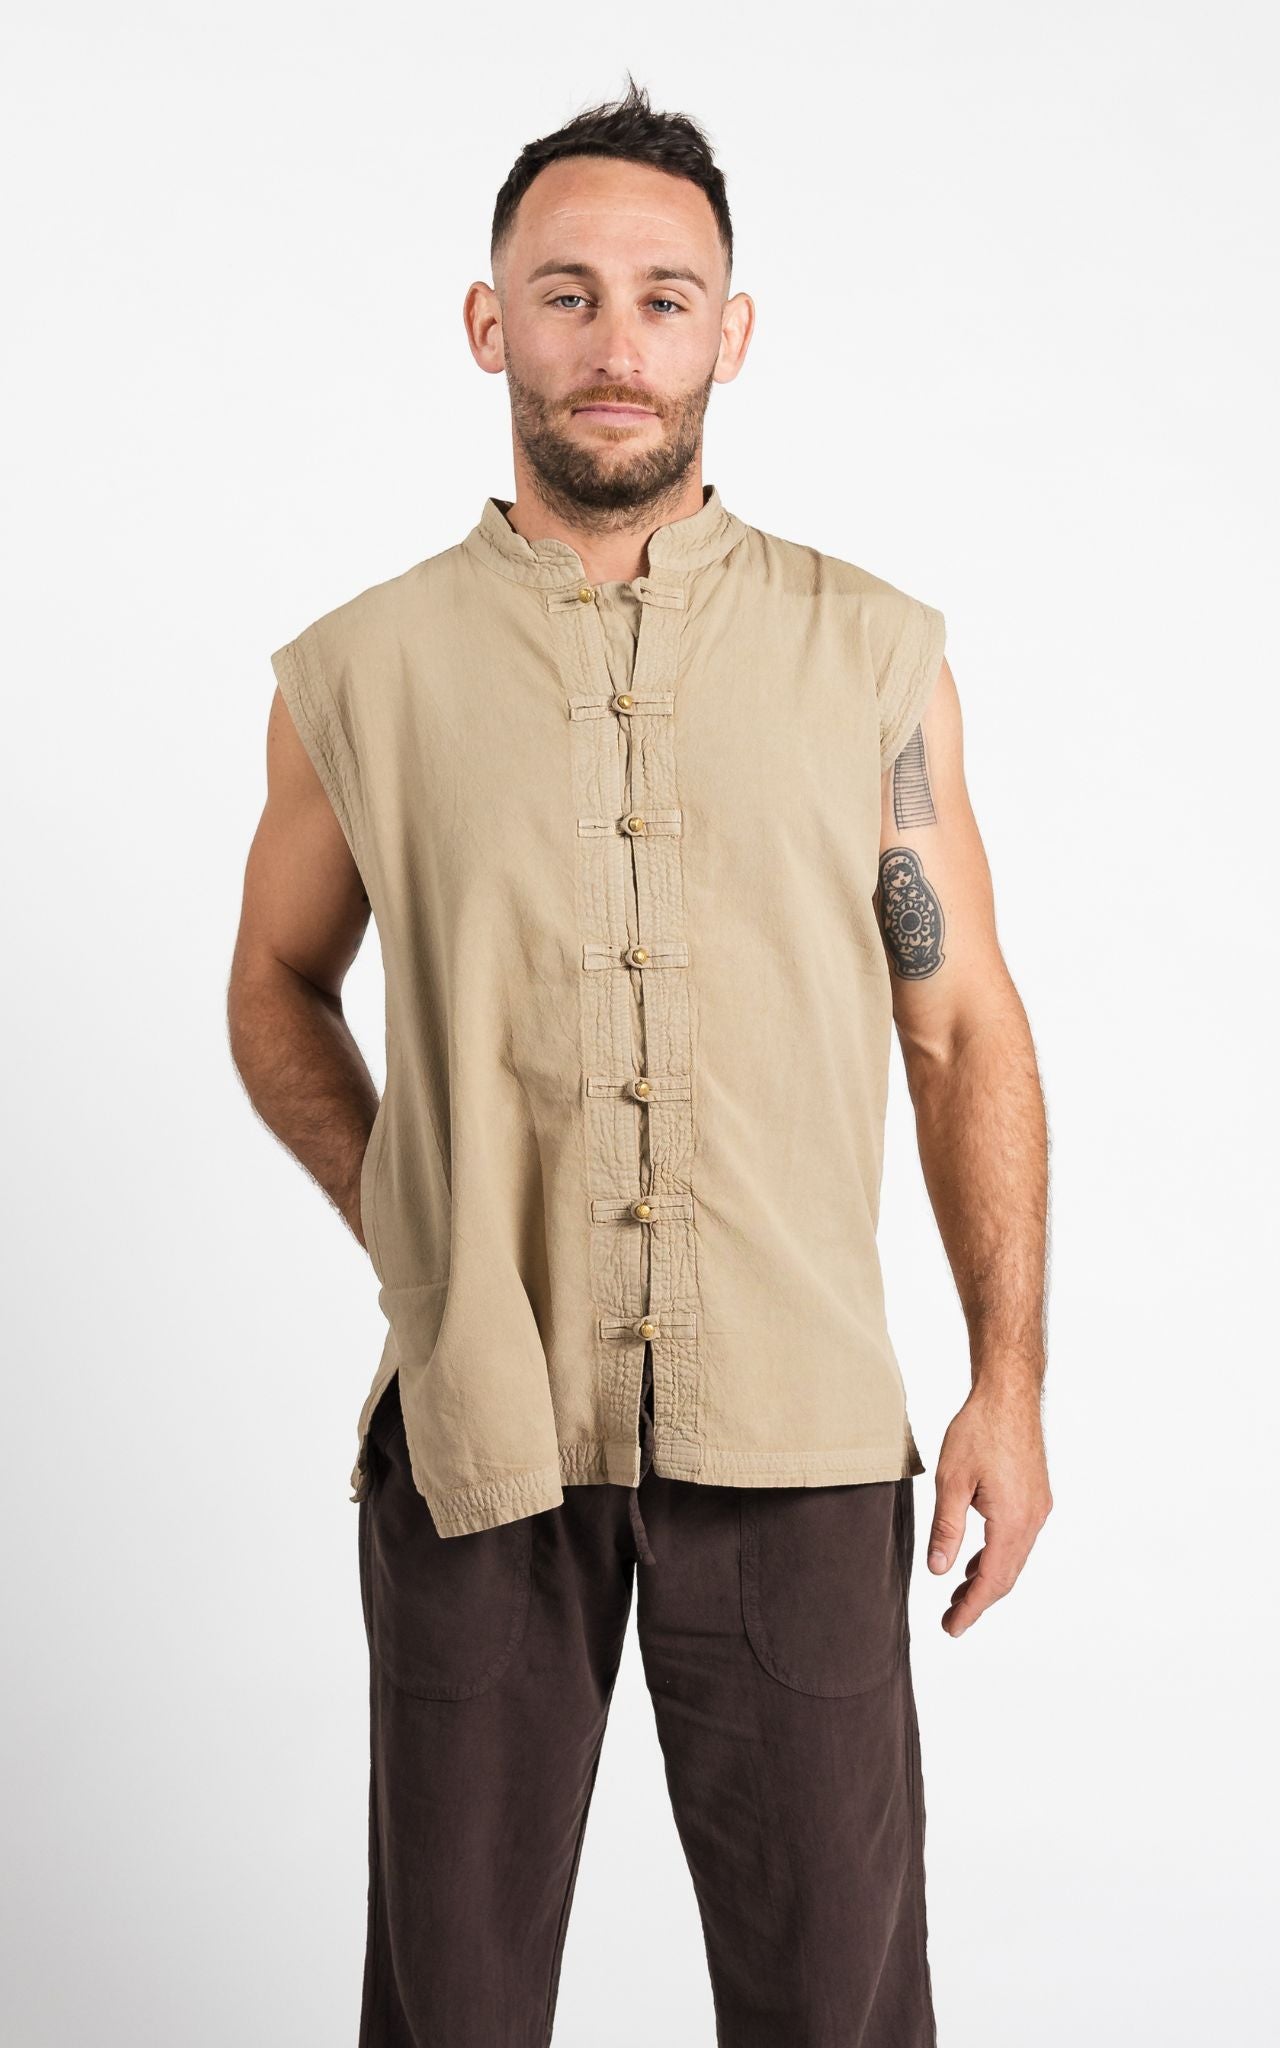 Surya Australia Ethical Cotton 'Lhasa' Shirt for men made in Nepal - Sand